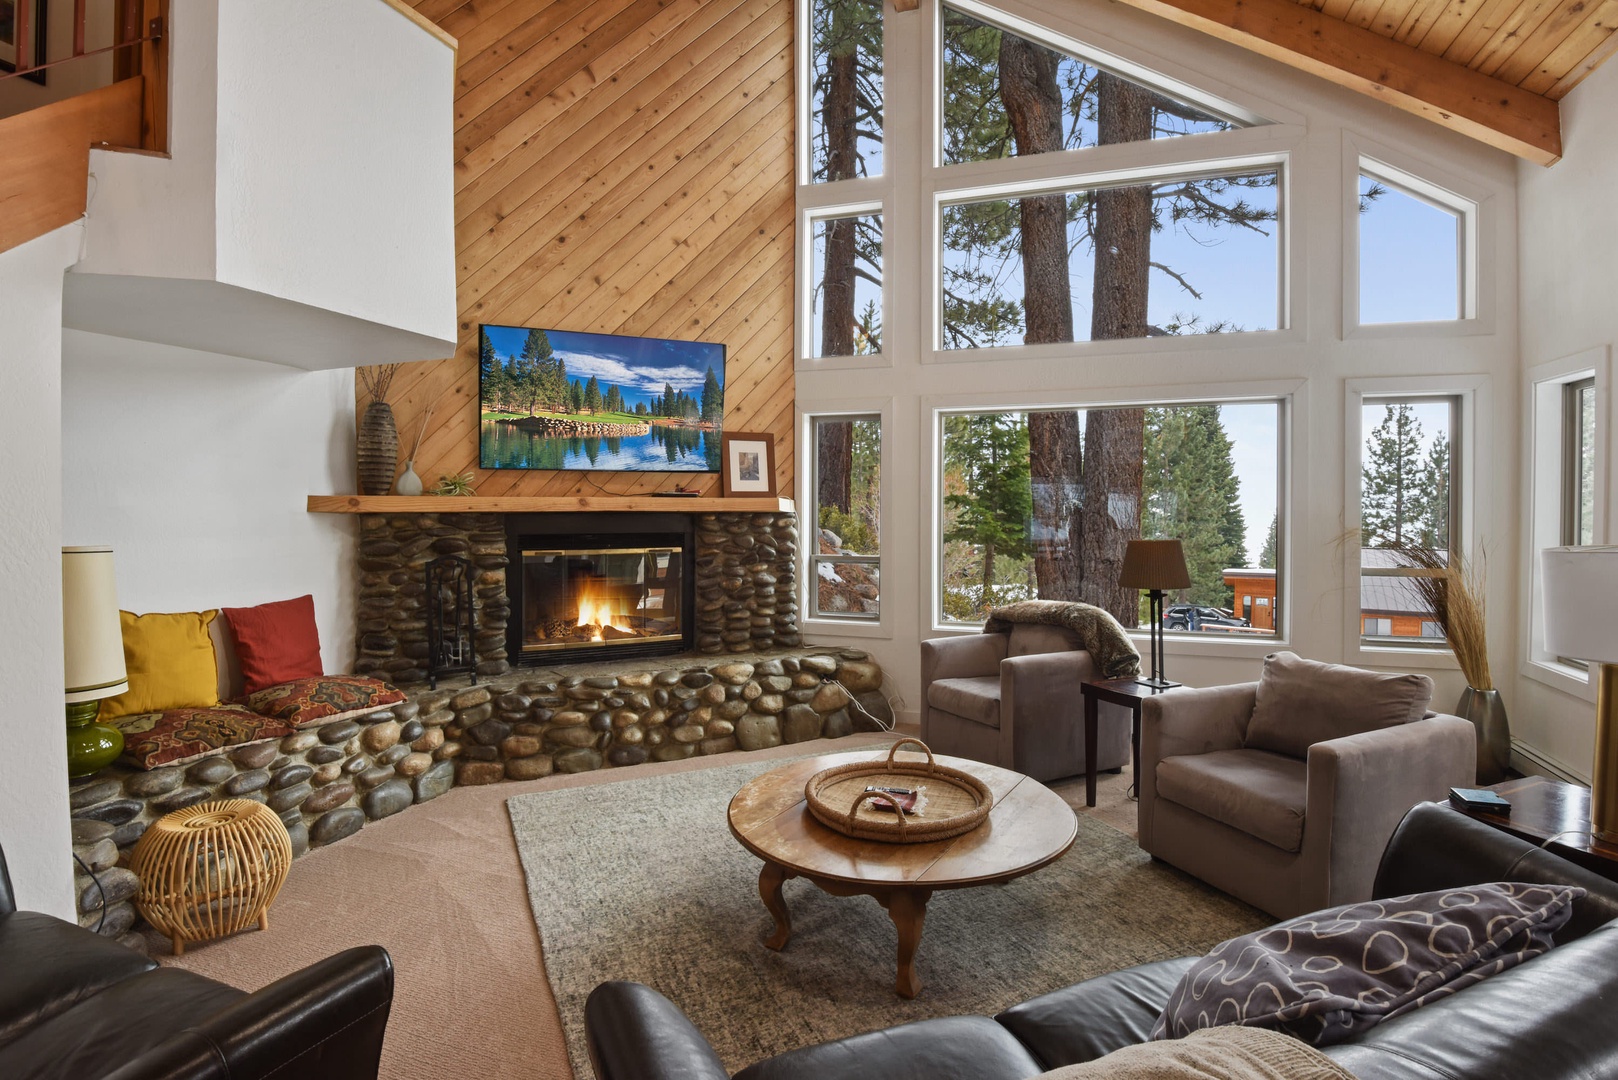 Living room w/ Smart TV, DVD player, wood burning fireplace and deck access